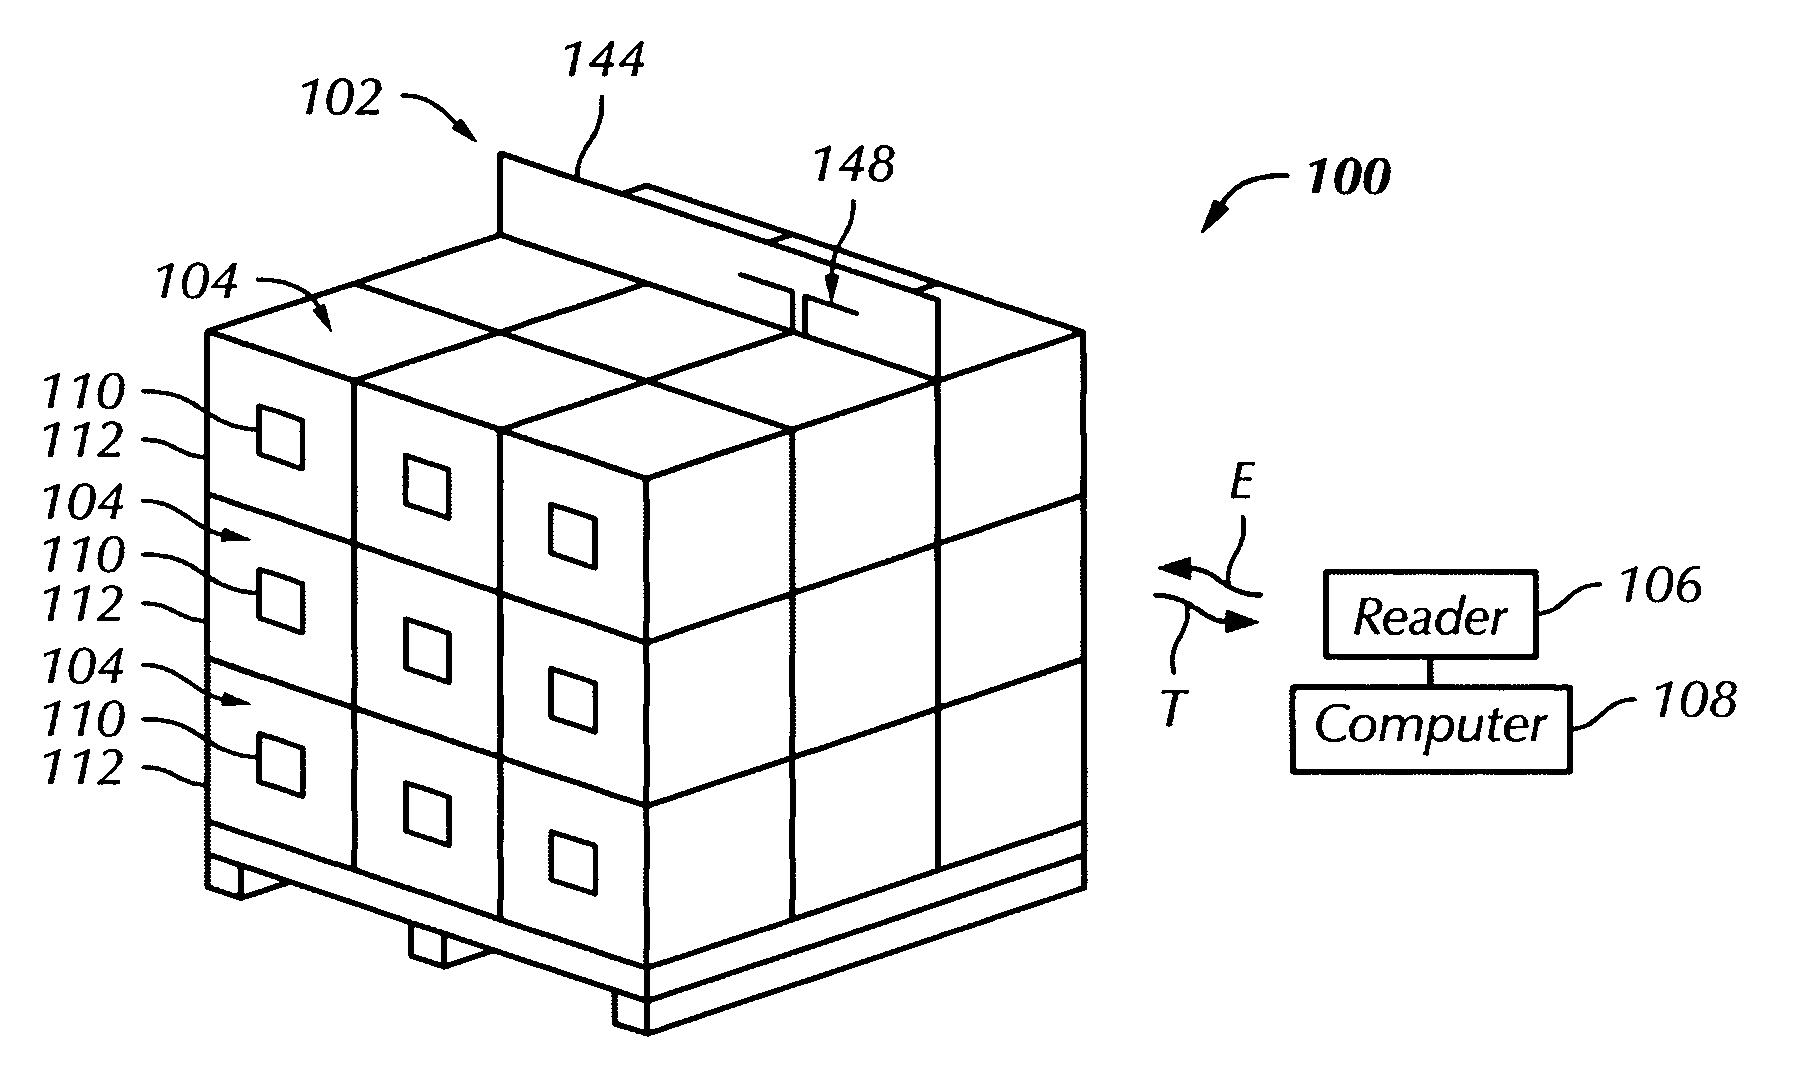 RFID devices for enabling reading of non-line-of-sight items